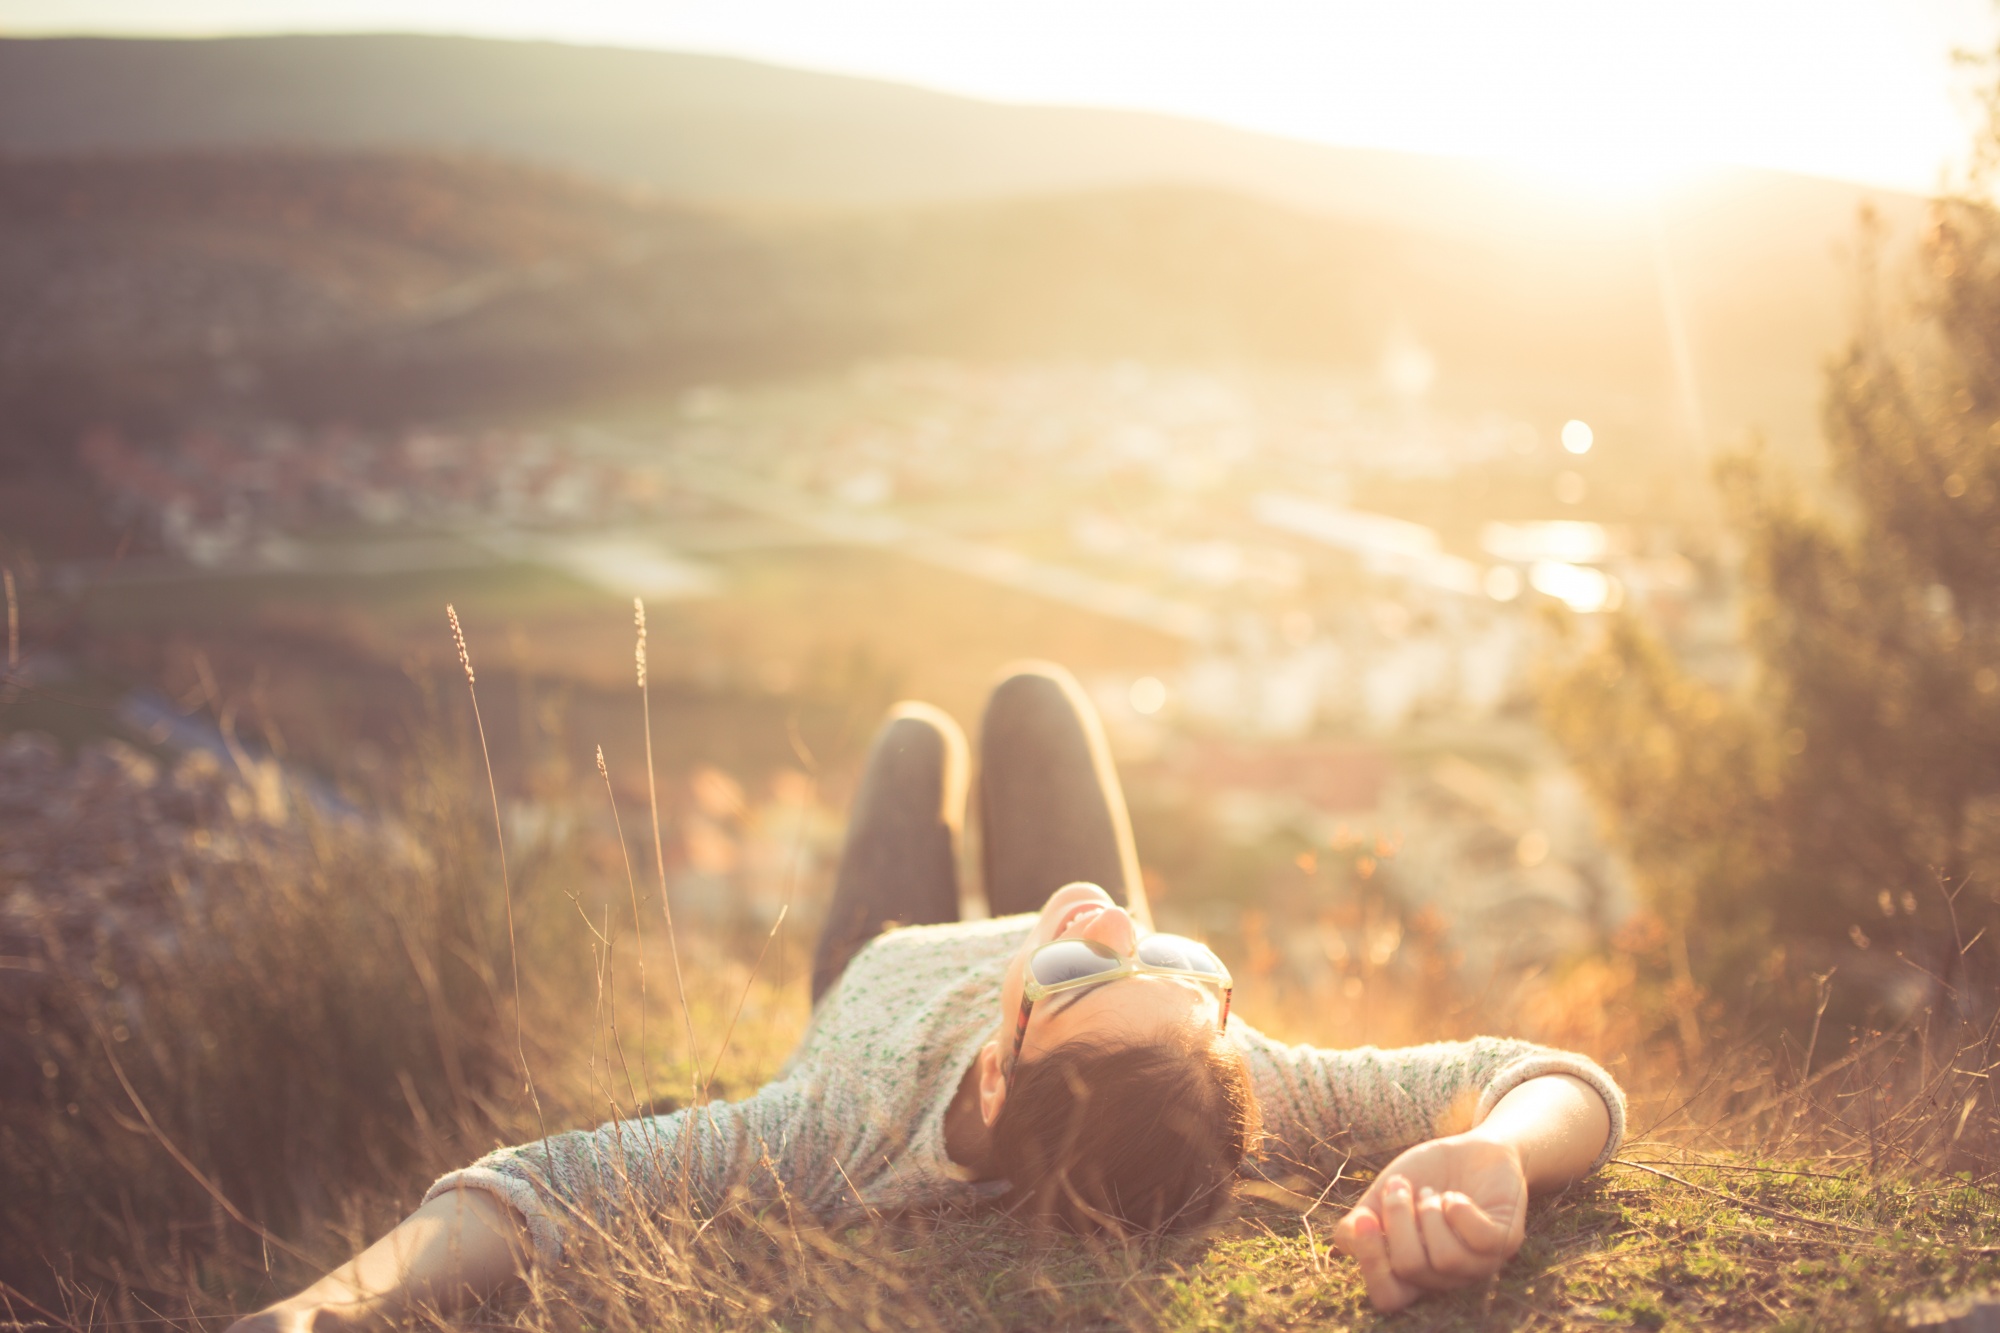 Woman laying on grass on hill above a town manifestation for beginners, manifesting your dream life